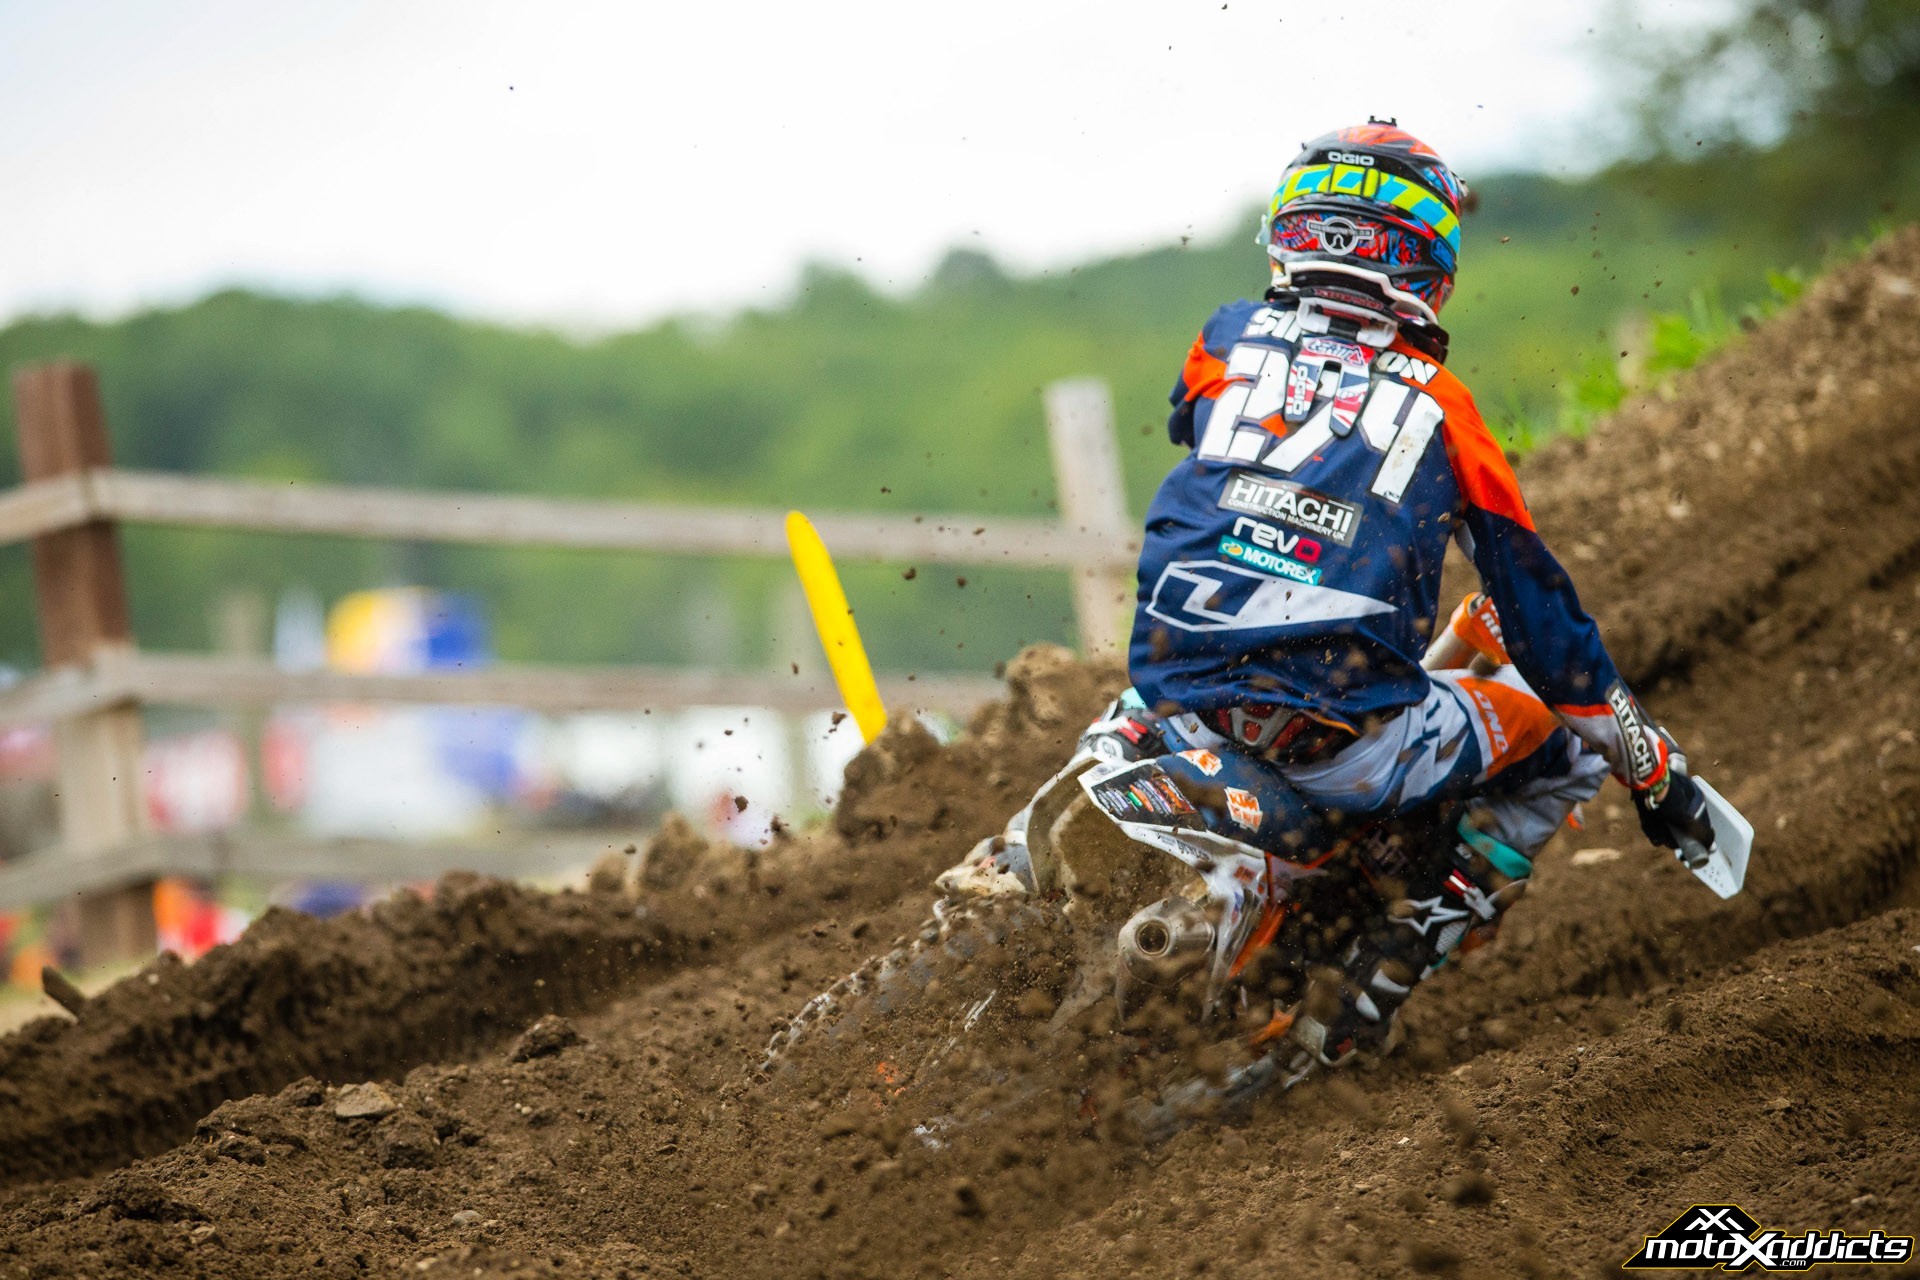 Simpson went to America and scored a 4th overall at the 2015 Unadilla National. Photo by: Hoppenworld